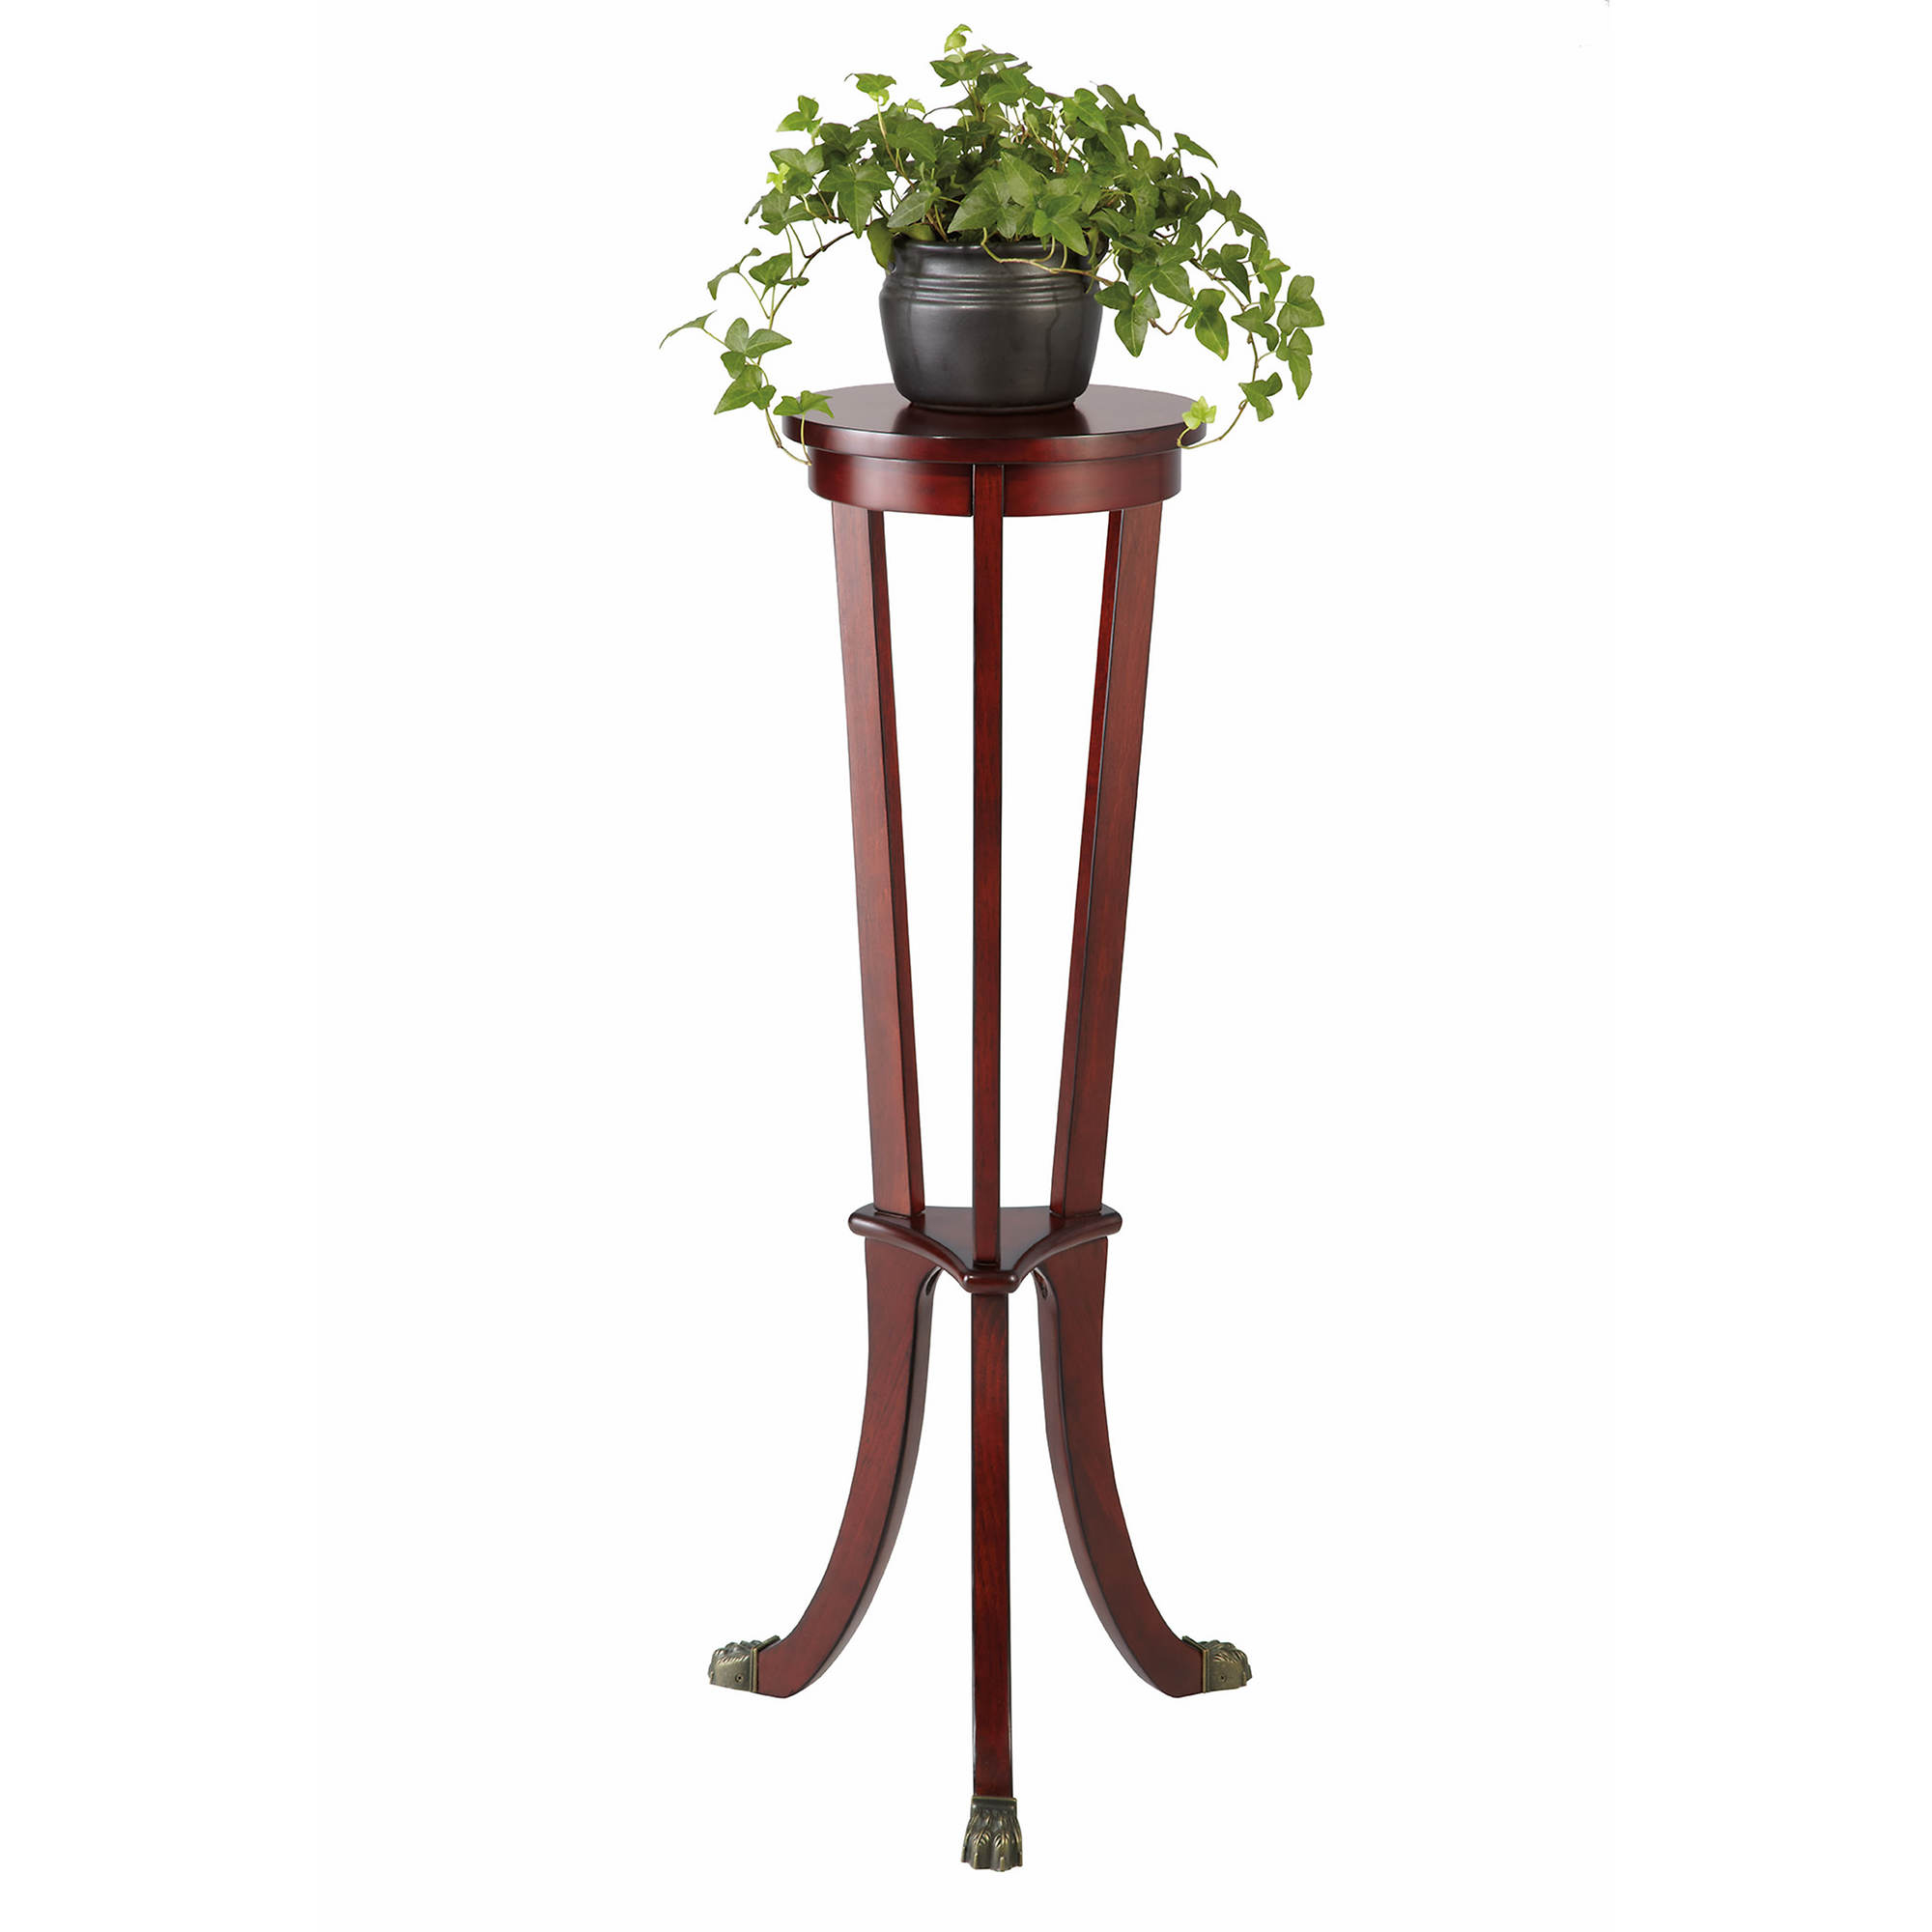 Indoor plant decoration ideas with beautiful tall wood plant stand